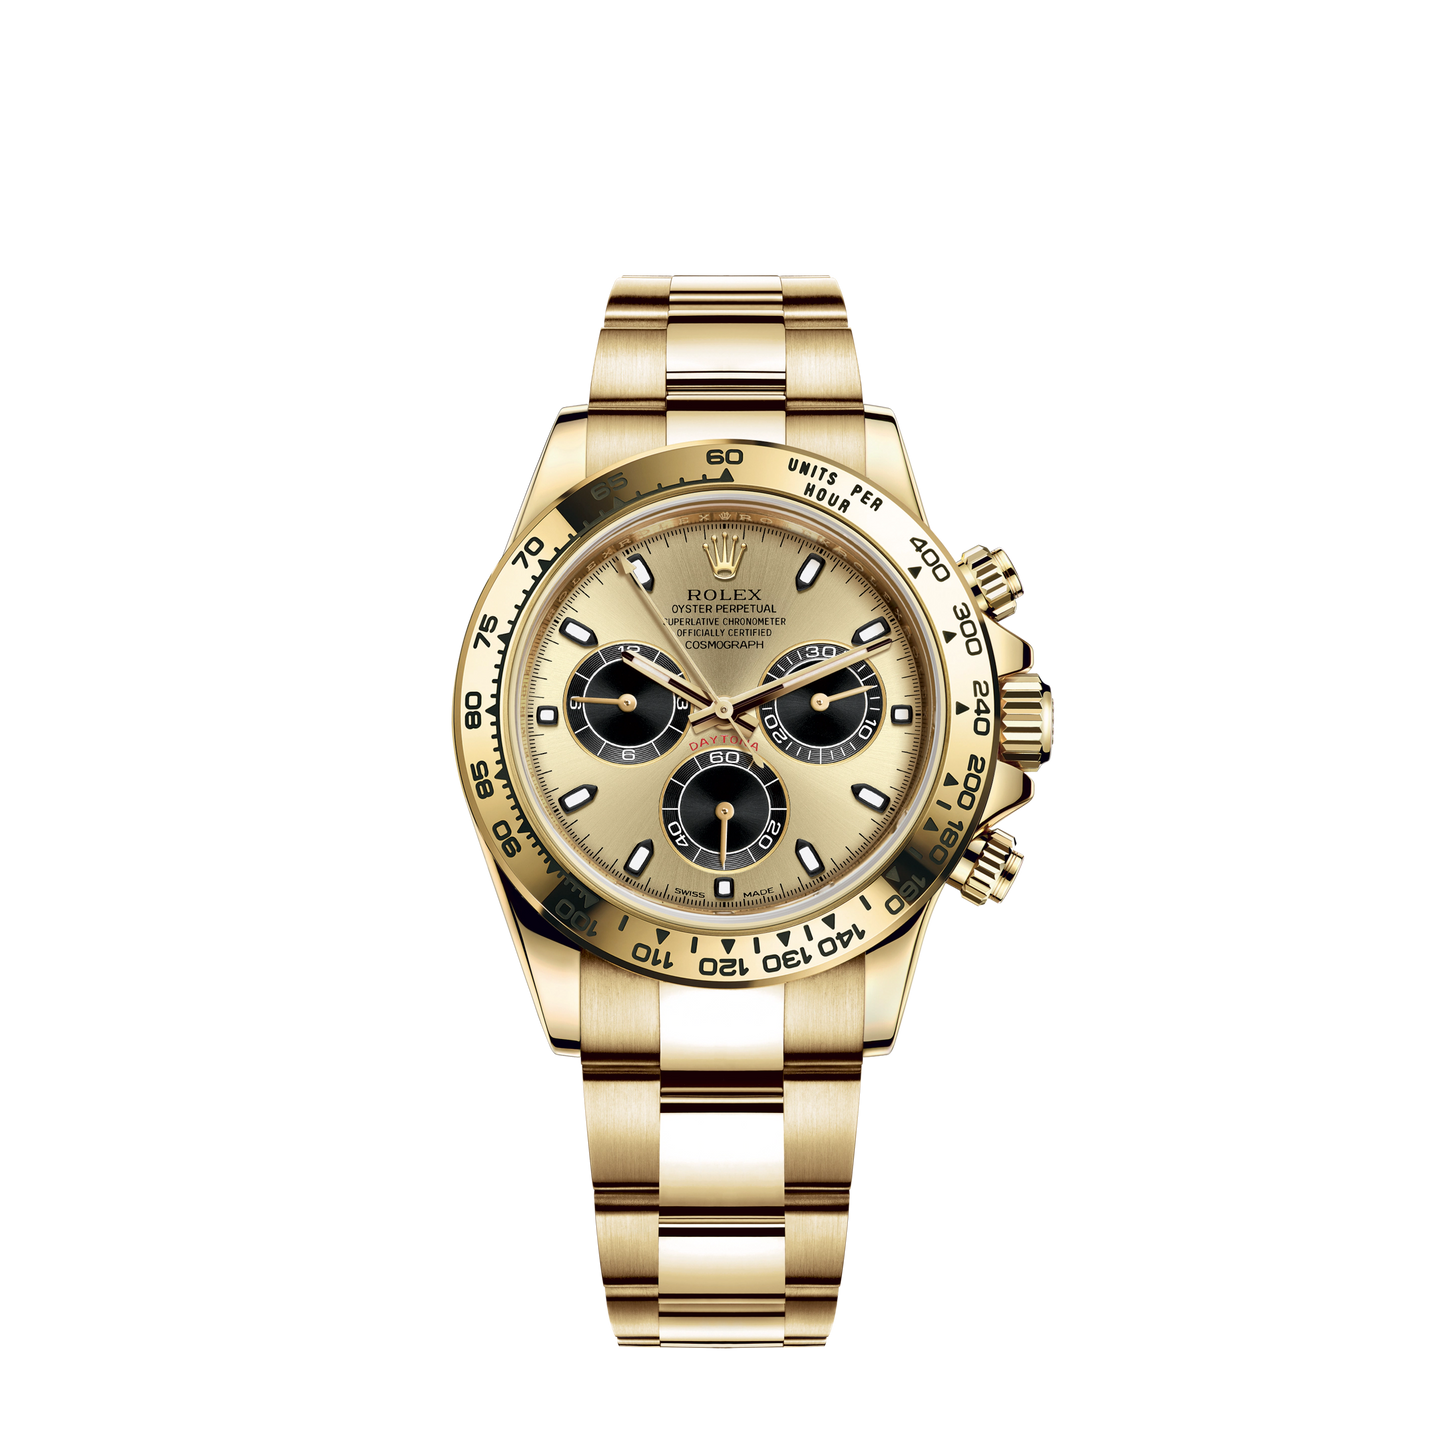 Cosmograph Daytona 40MM Oyster Bracelet Golden and Black Dial 18 CT Yellow Gold Bezel With Engraved Tachymetric Scale